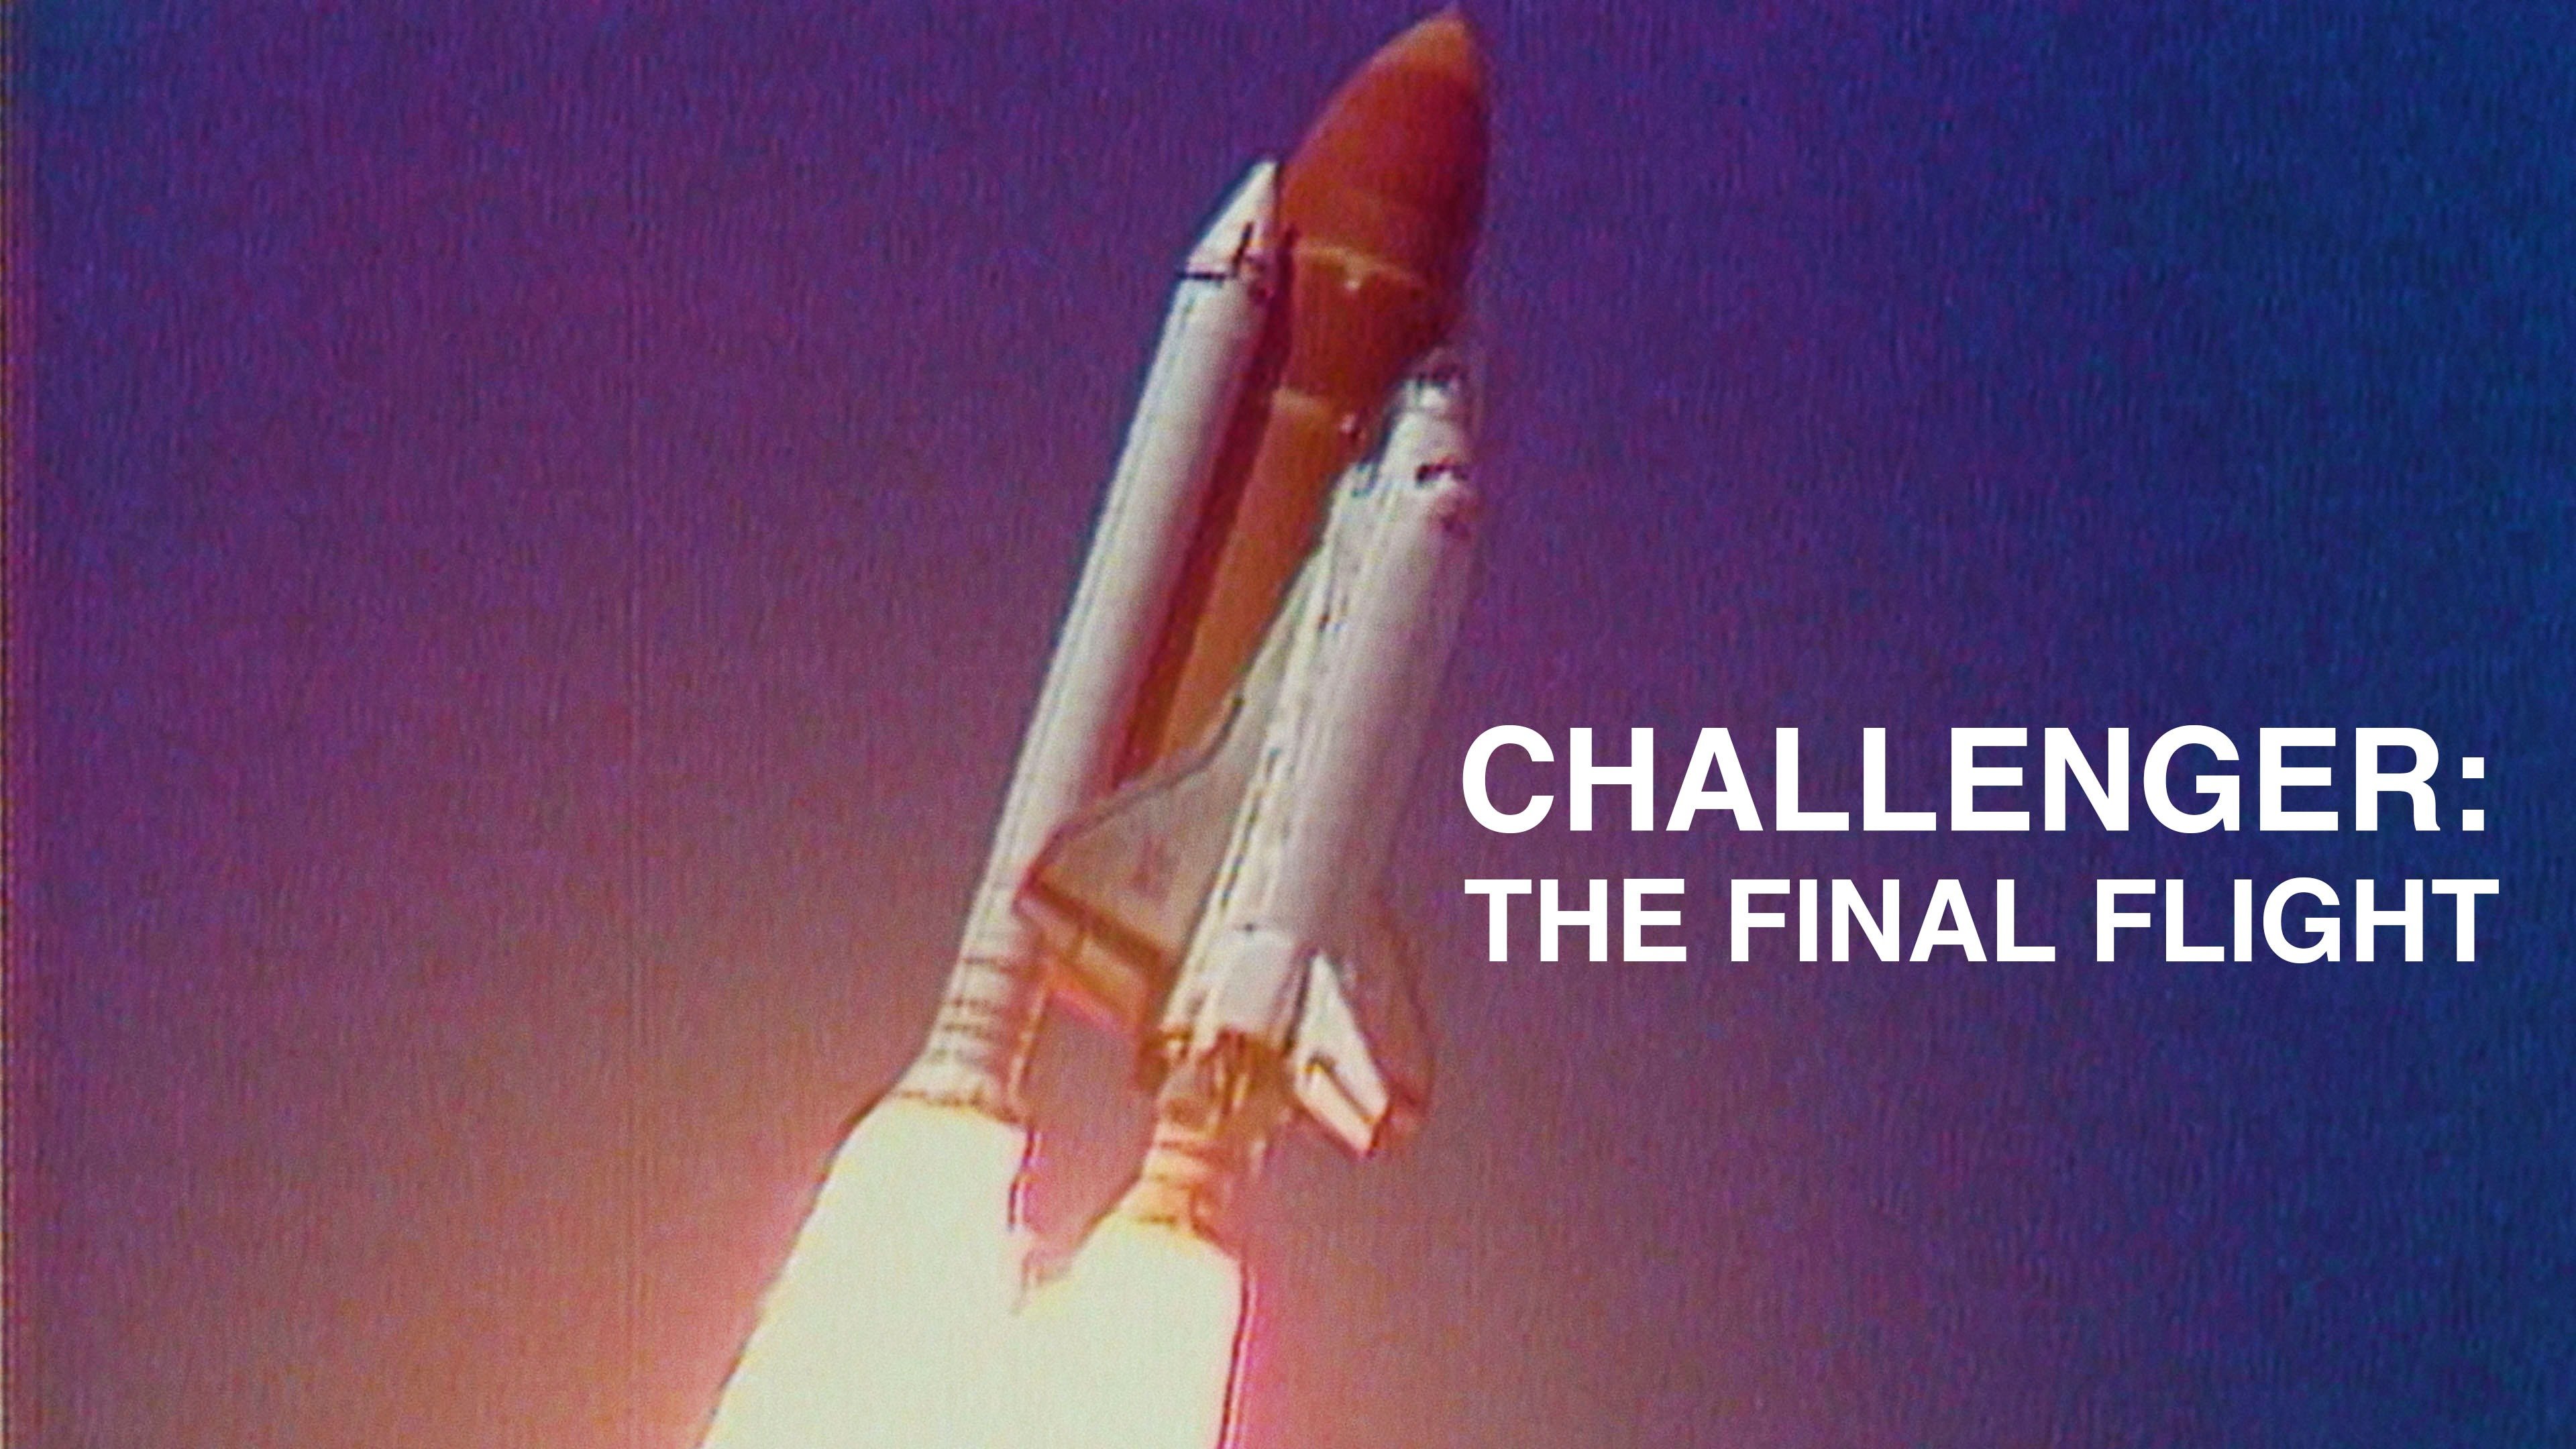 movie about space shuttle challenger